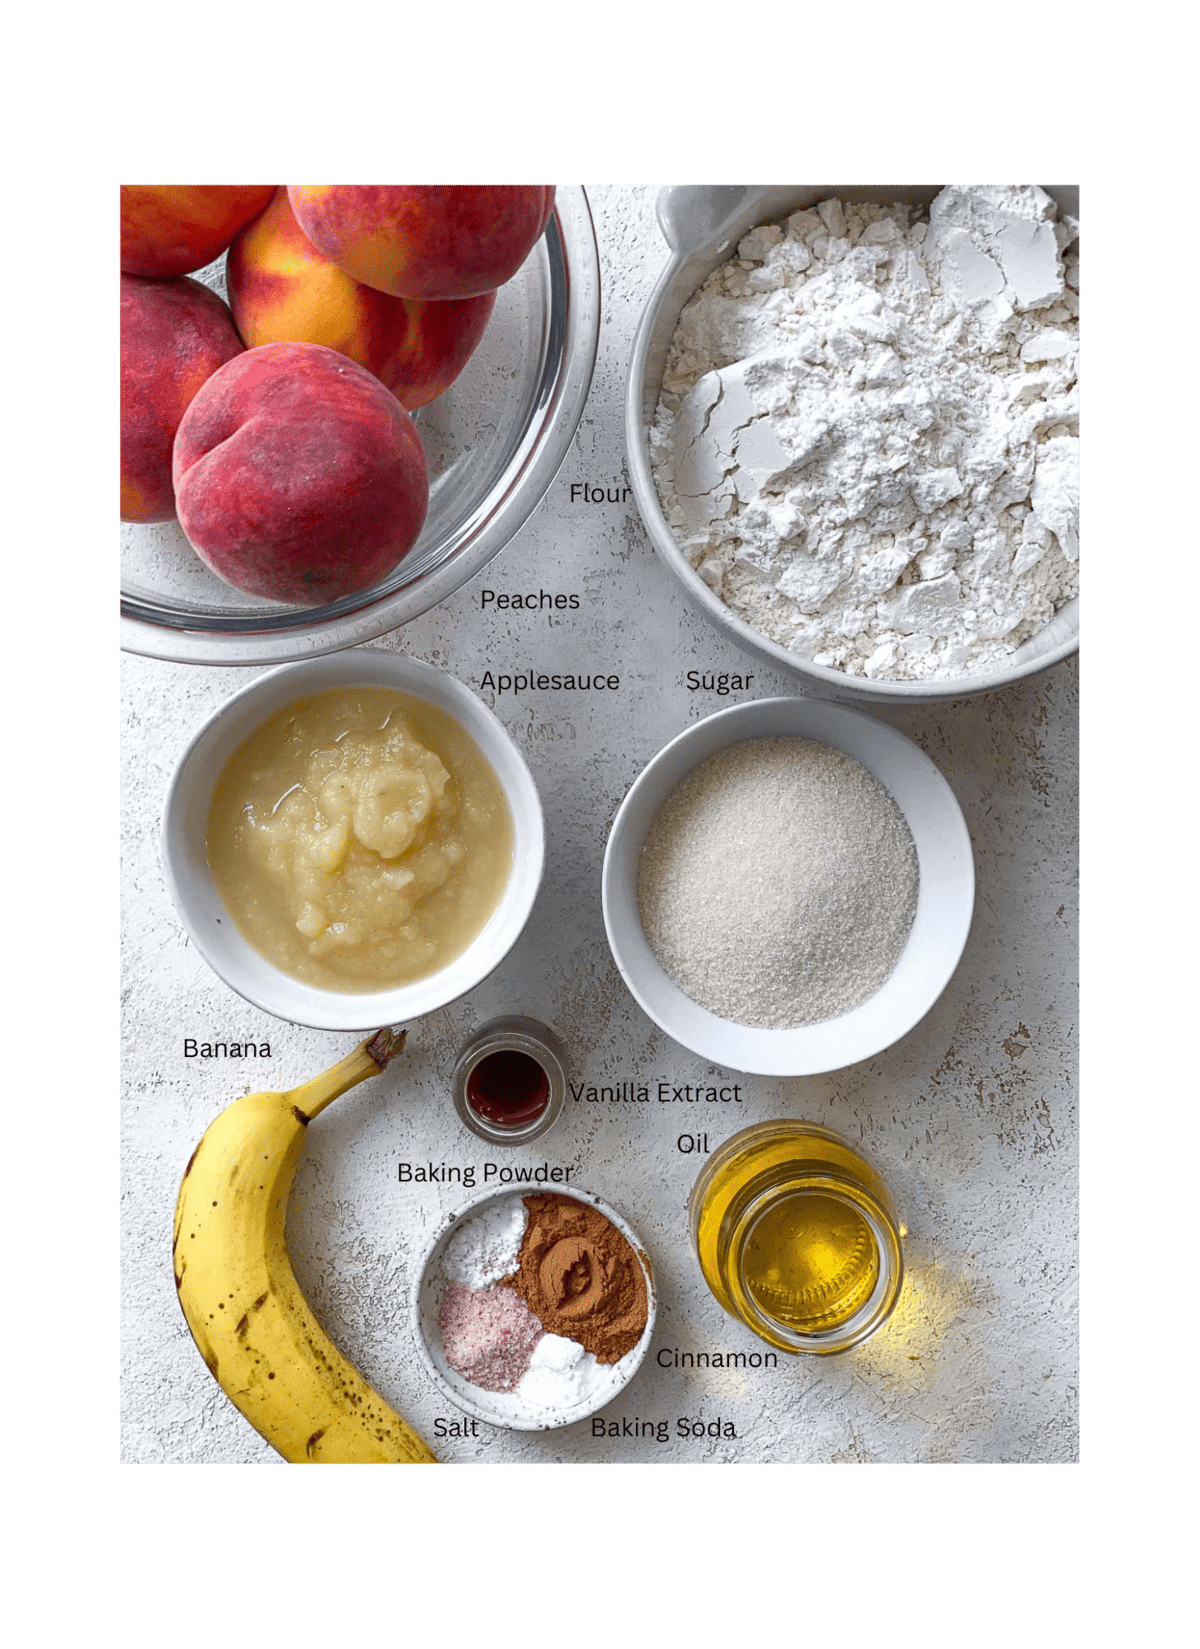 ingredients for Easy Banana Peach Bread measured out against a white surface